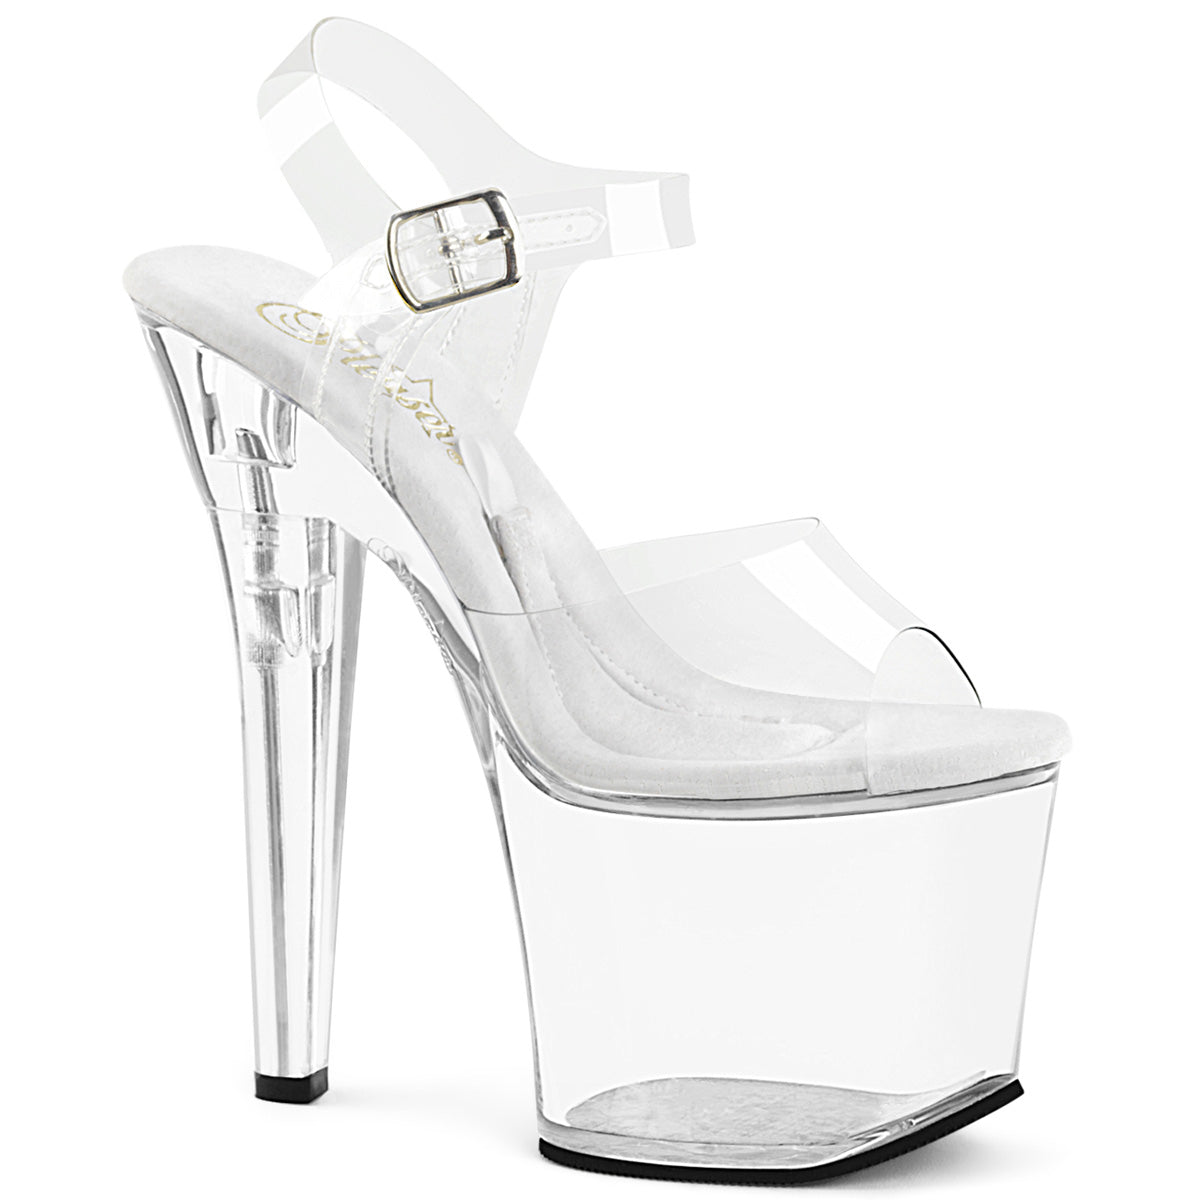 Pleaser TREASURE-708RAD Clear 7 Inch (178mm) Heel, 3 1/4 Inch (83mm) Platform Ankle Strap Sandal  Featuring Base Compartment Accessible from the Insole